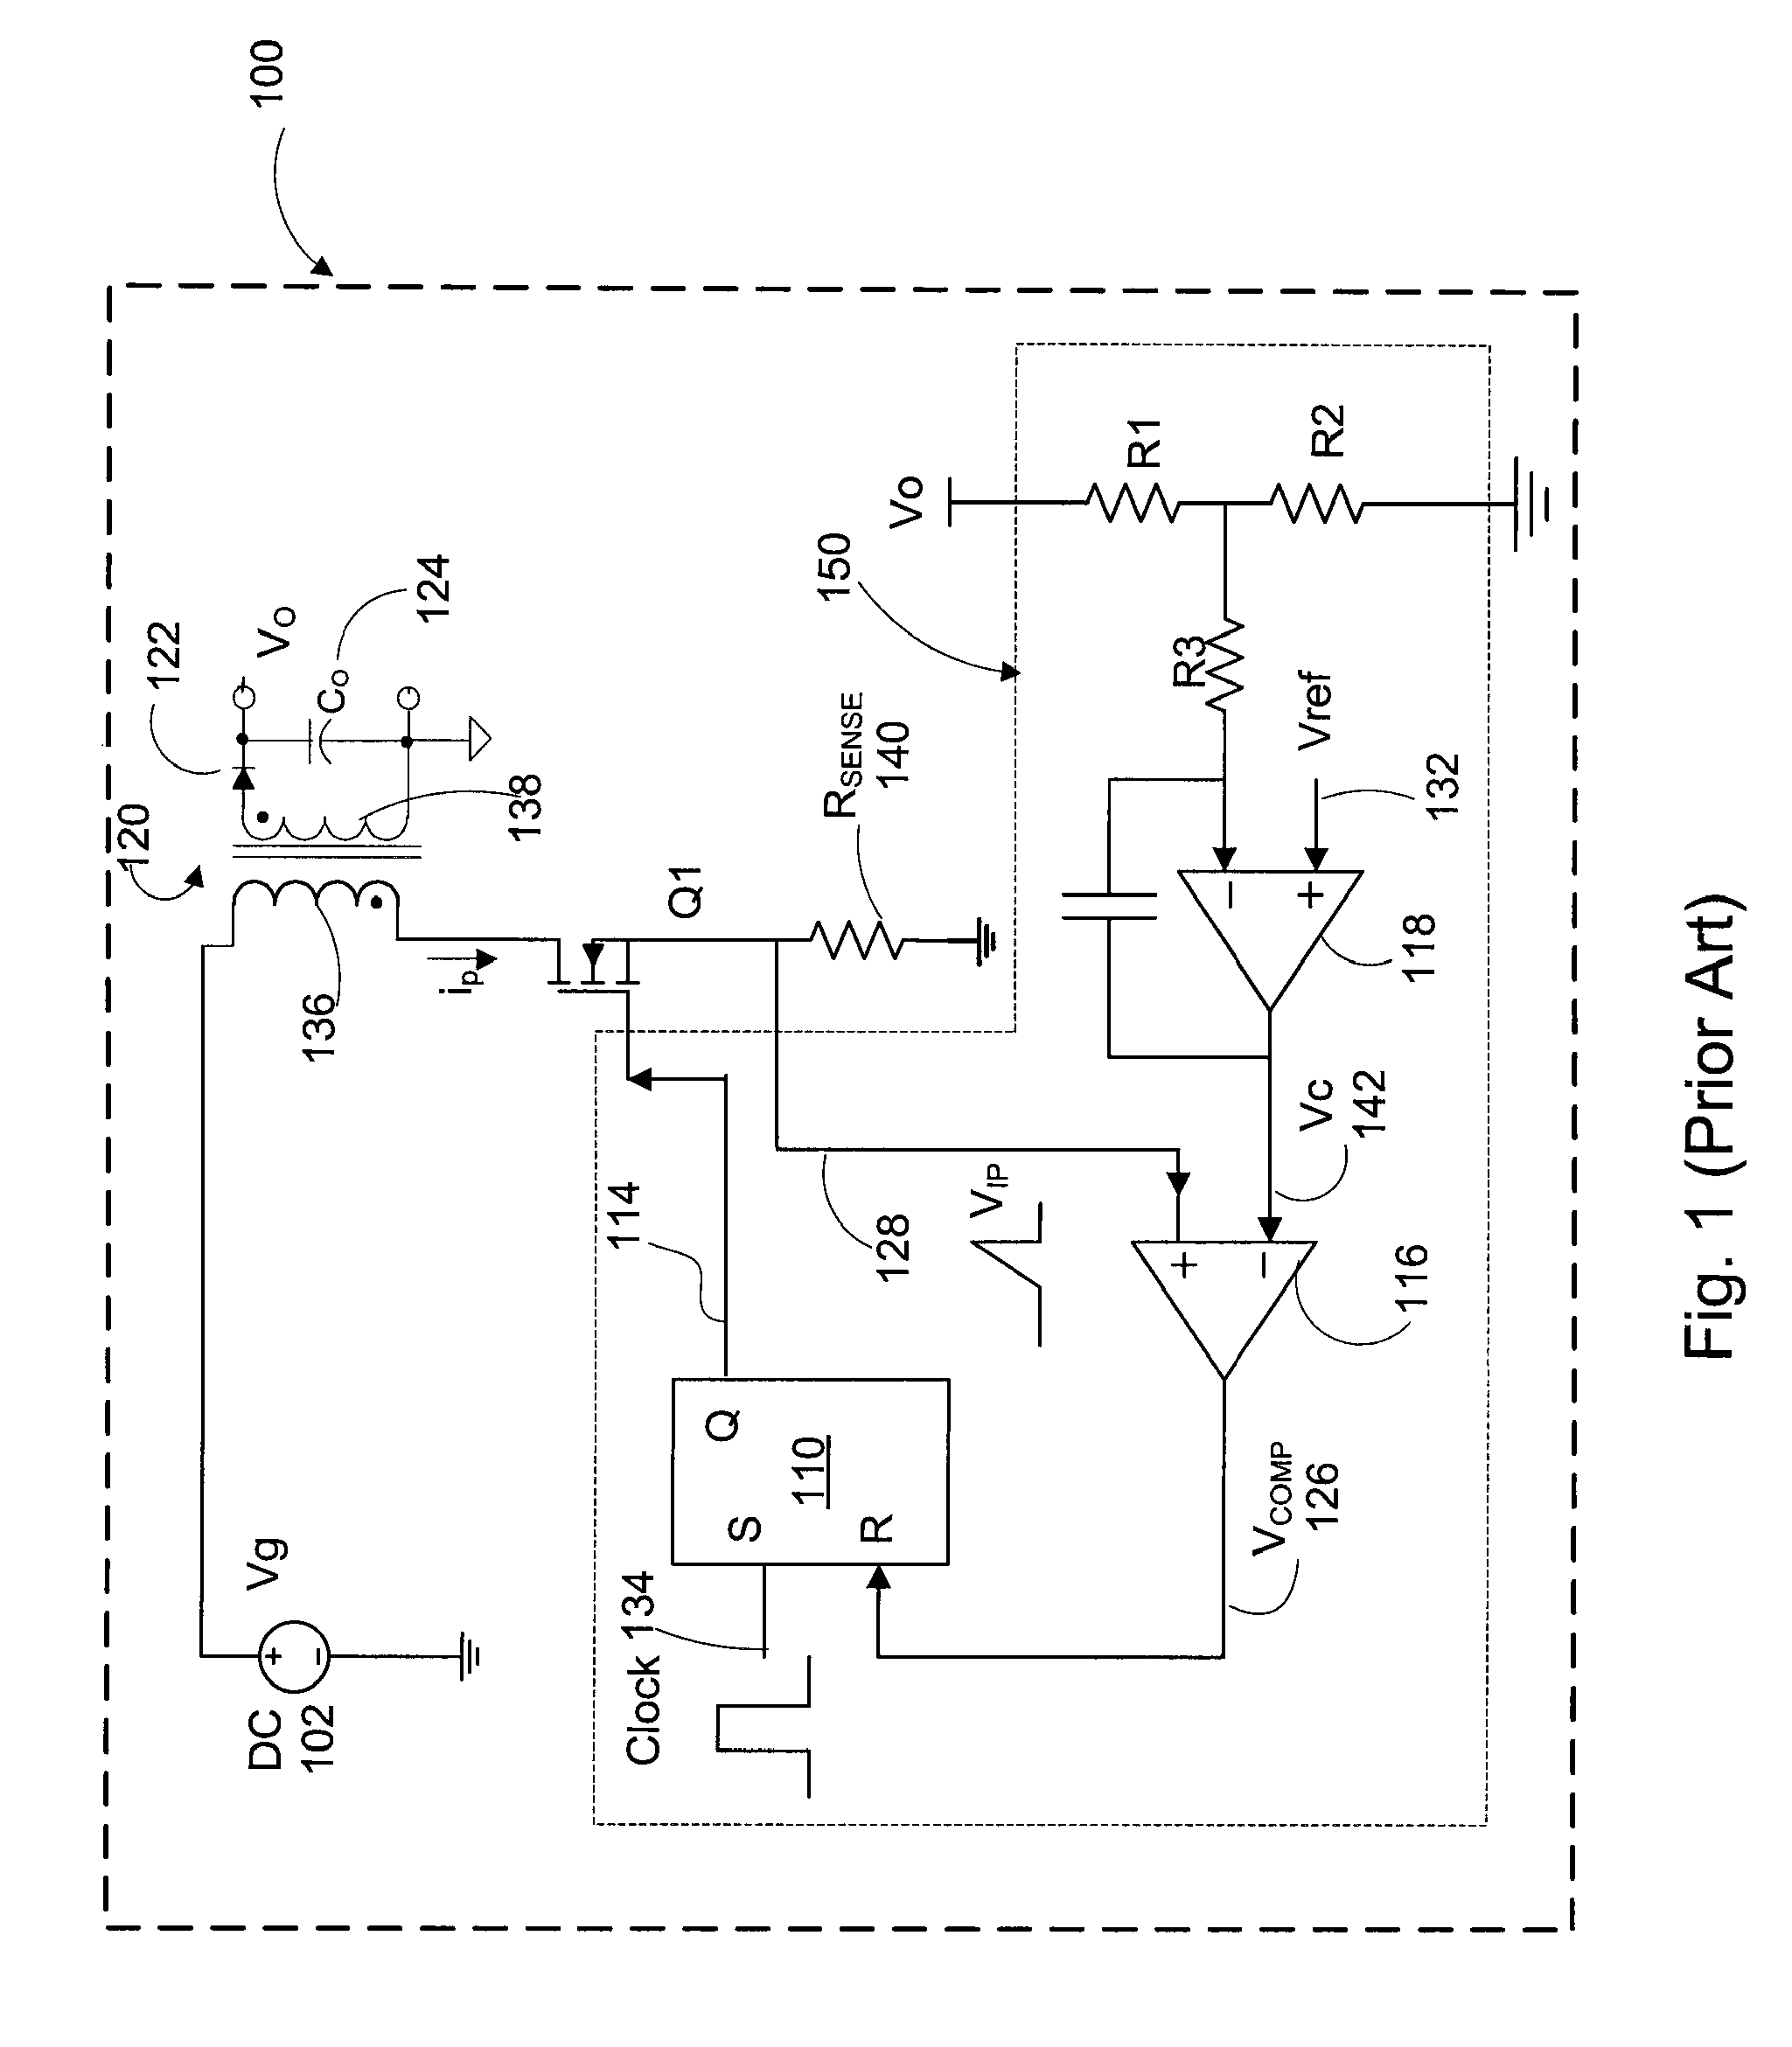 Power converter with emulated peak current mode control